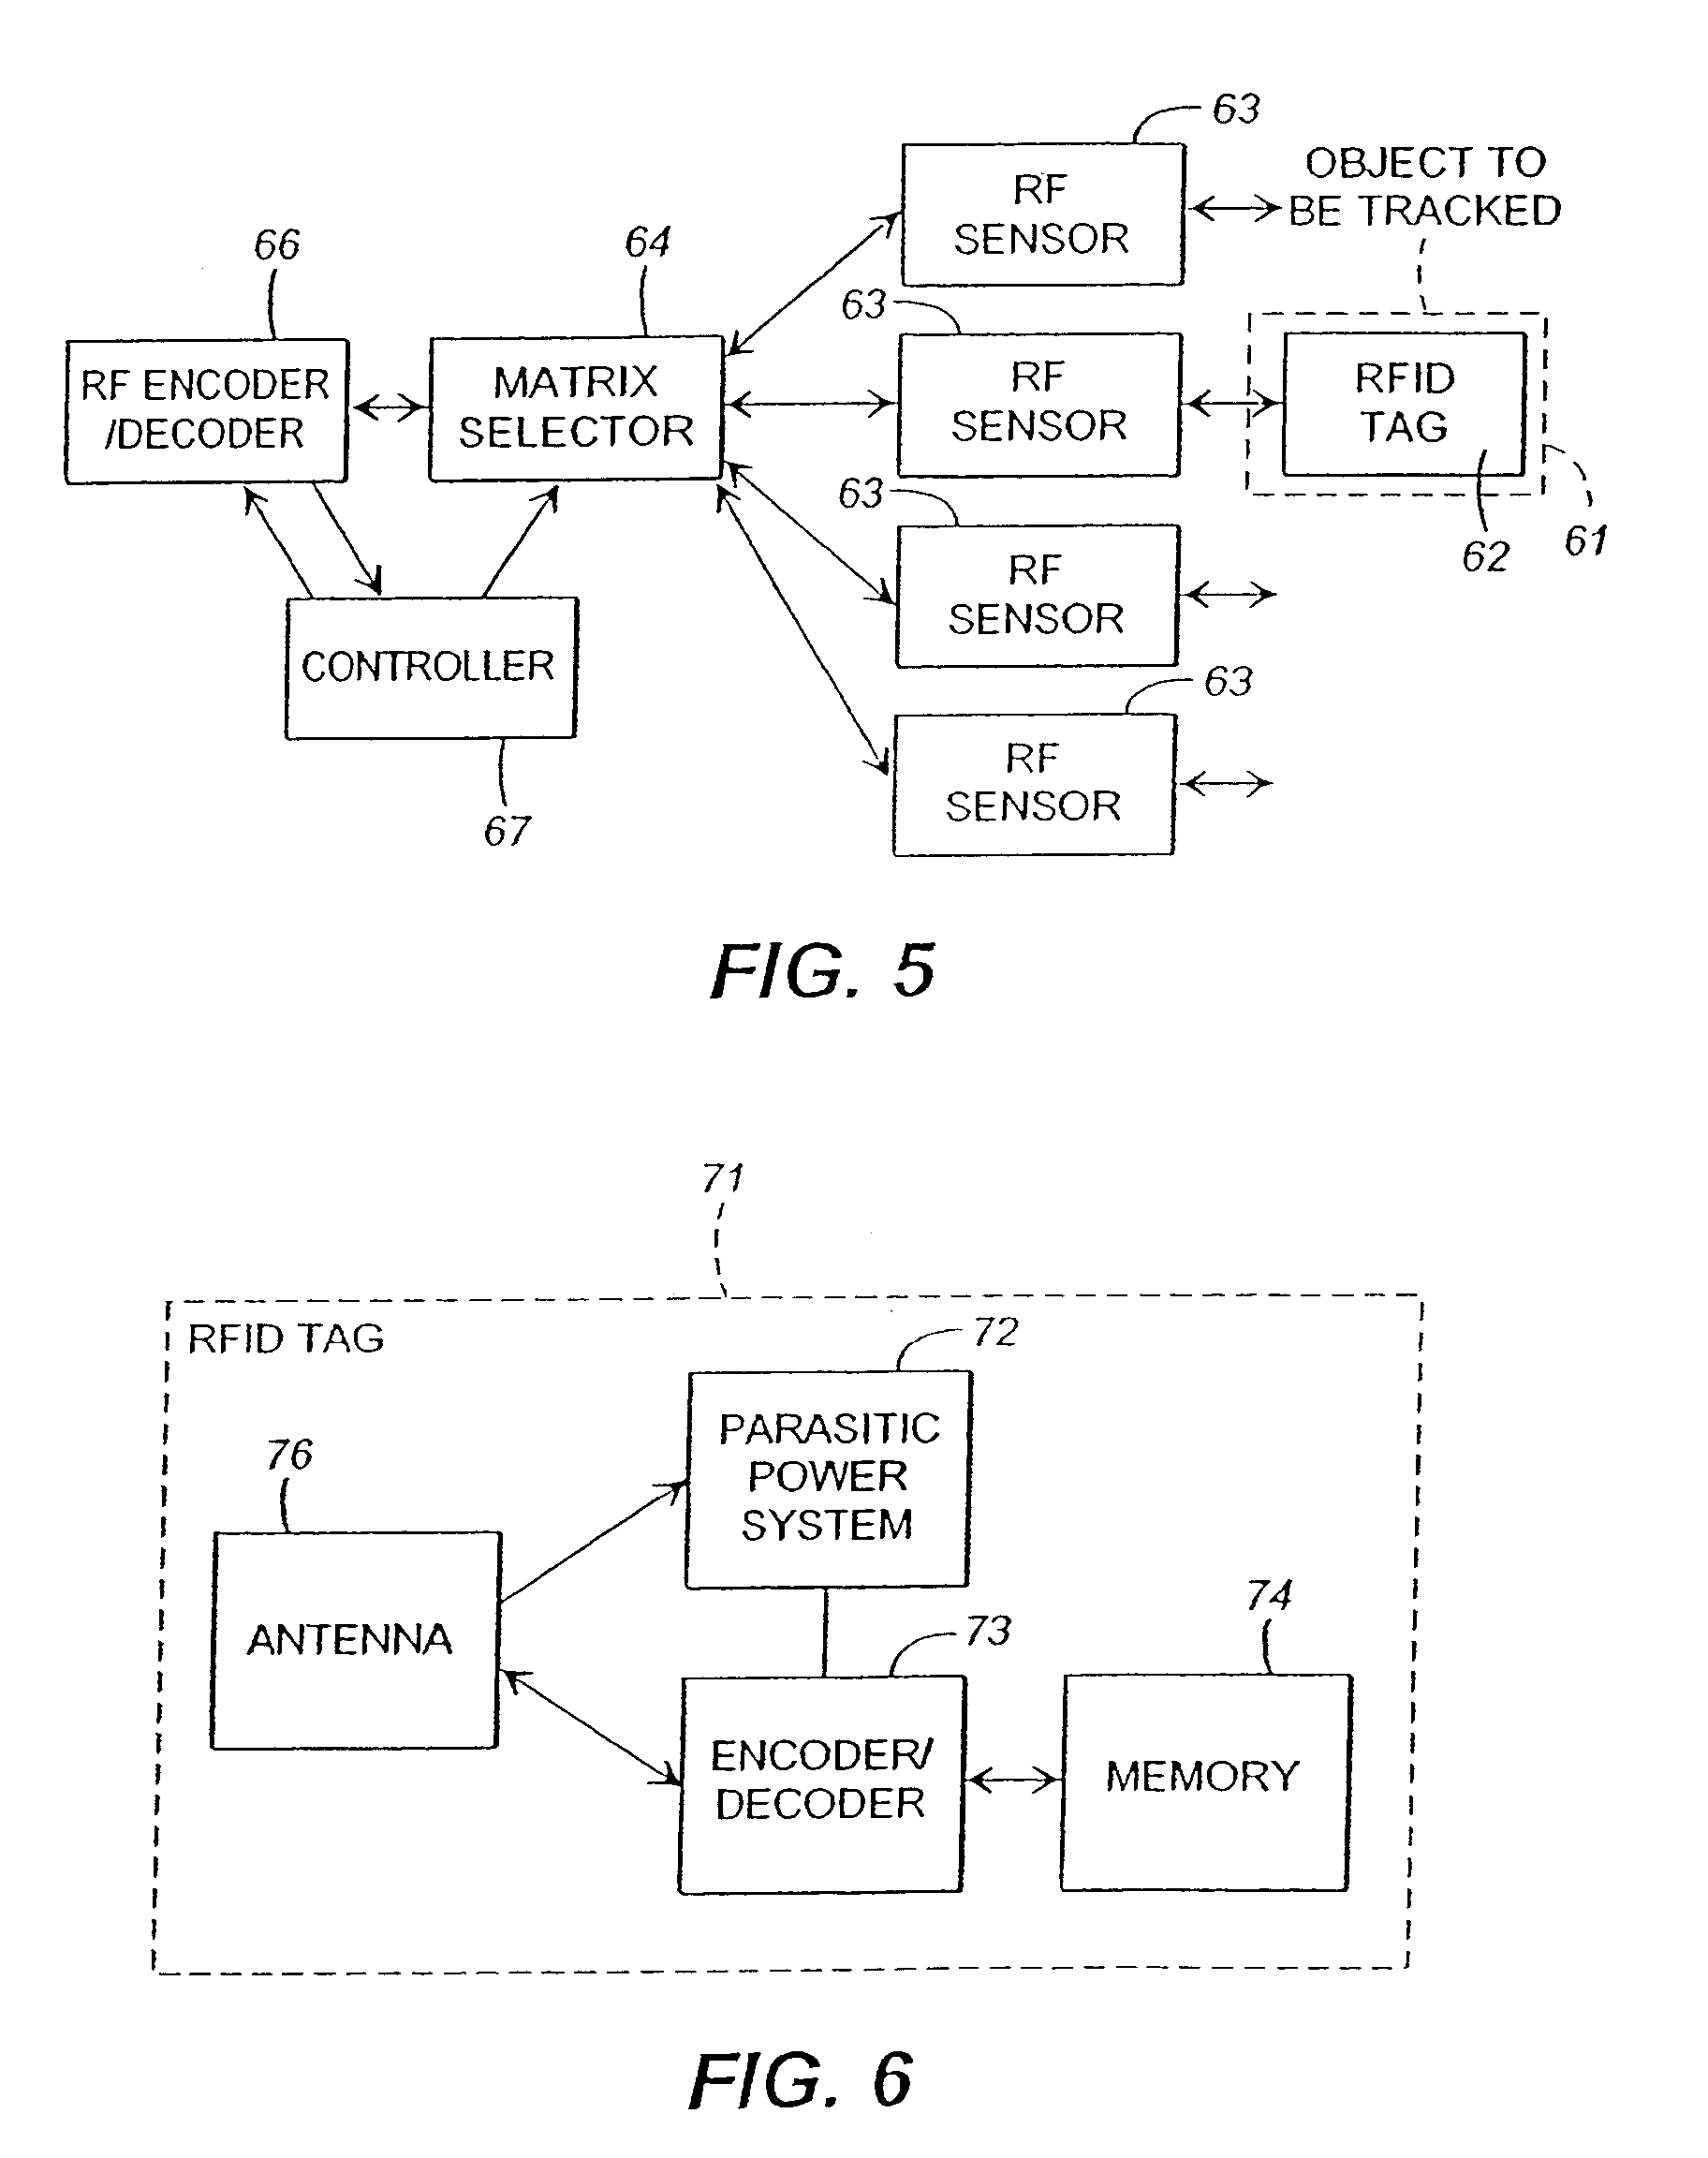 Object tracking system with non-contact object detection and identification